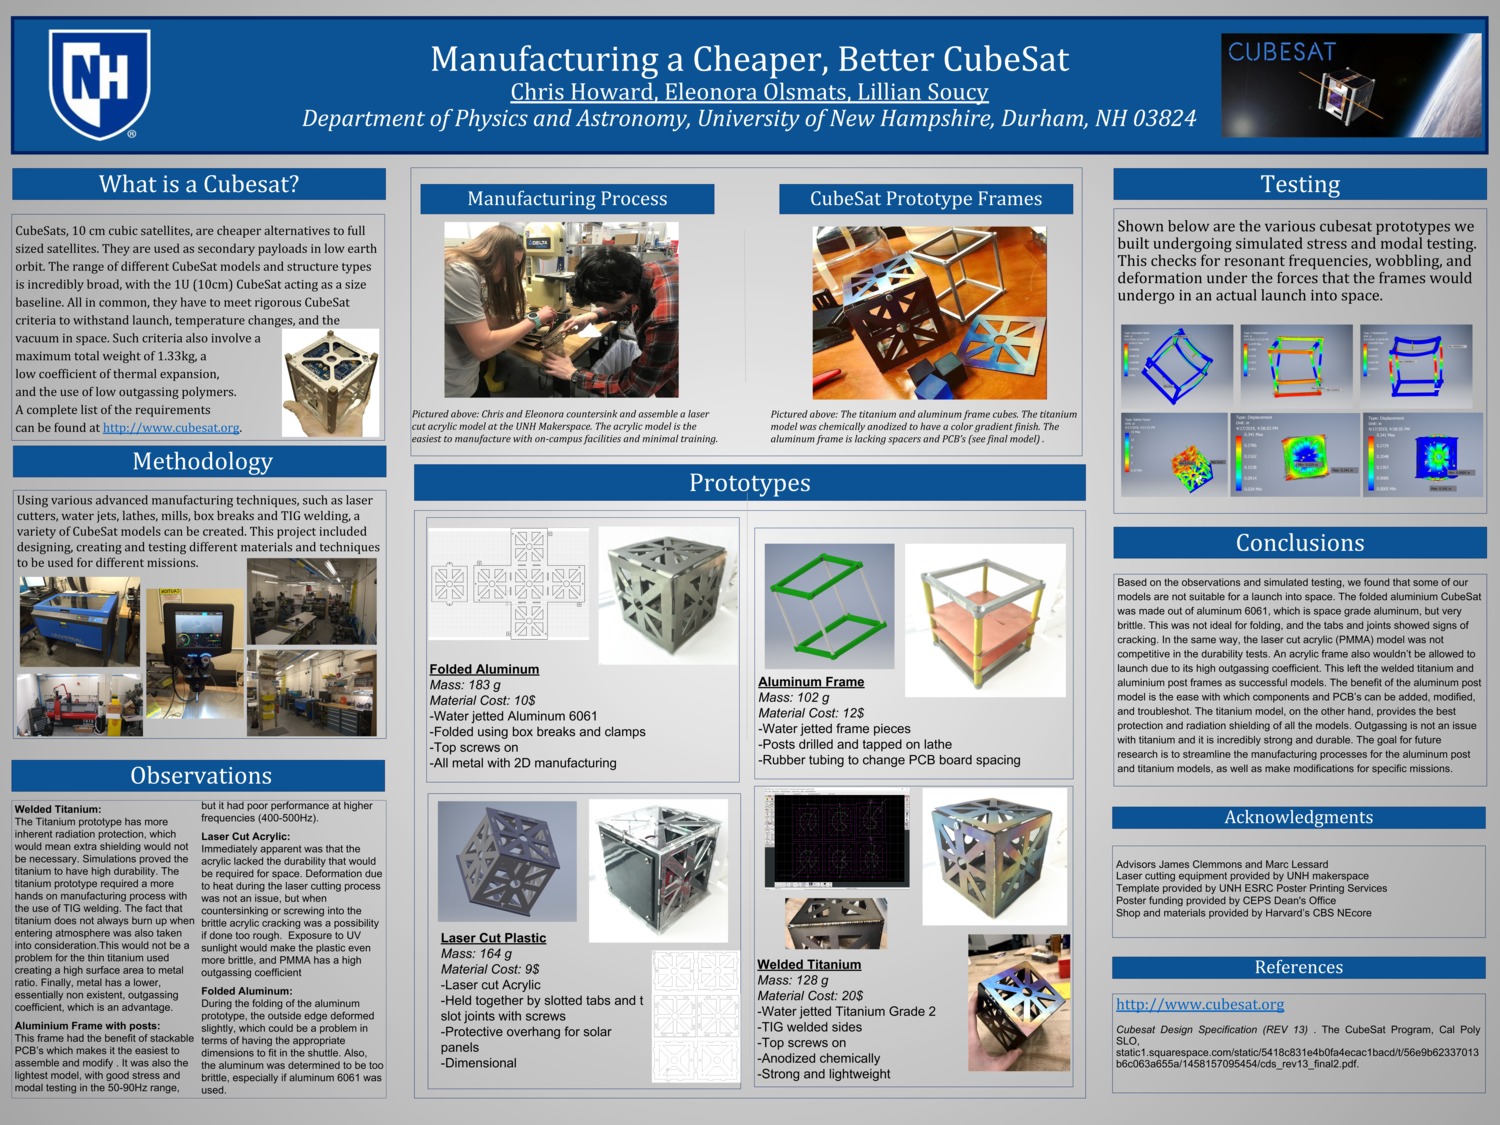 Manufacturing A Cheaper, Better Cubesat by lms1074